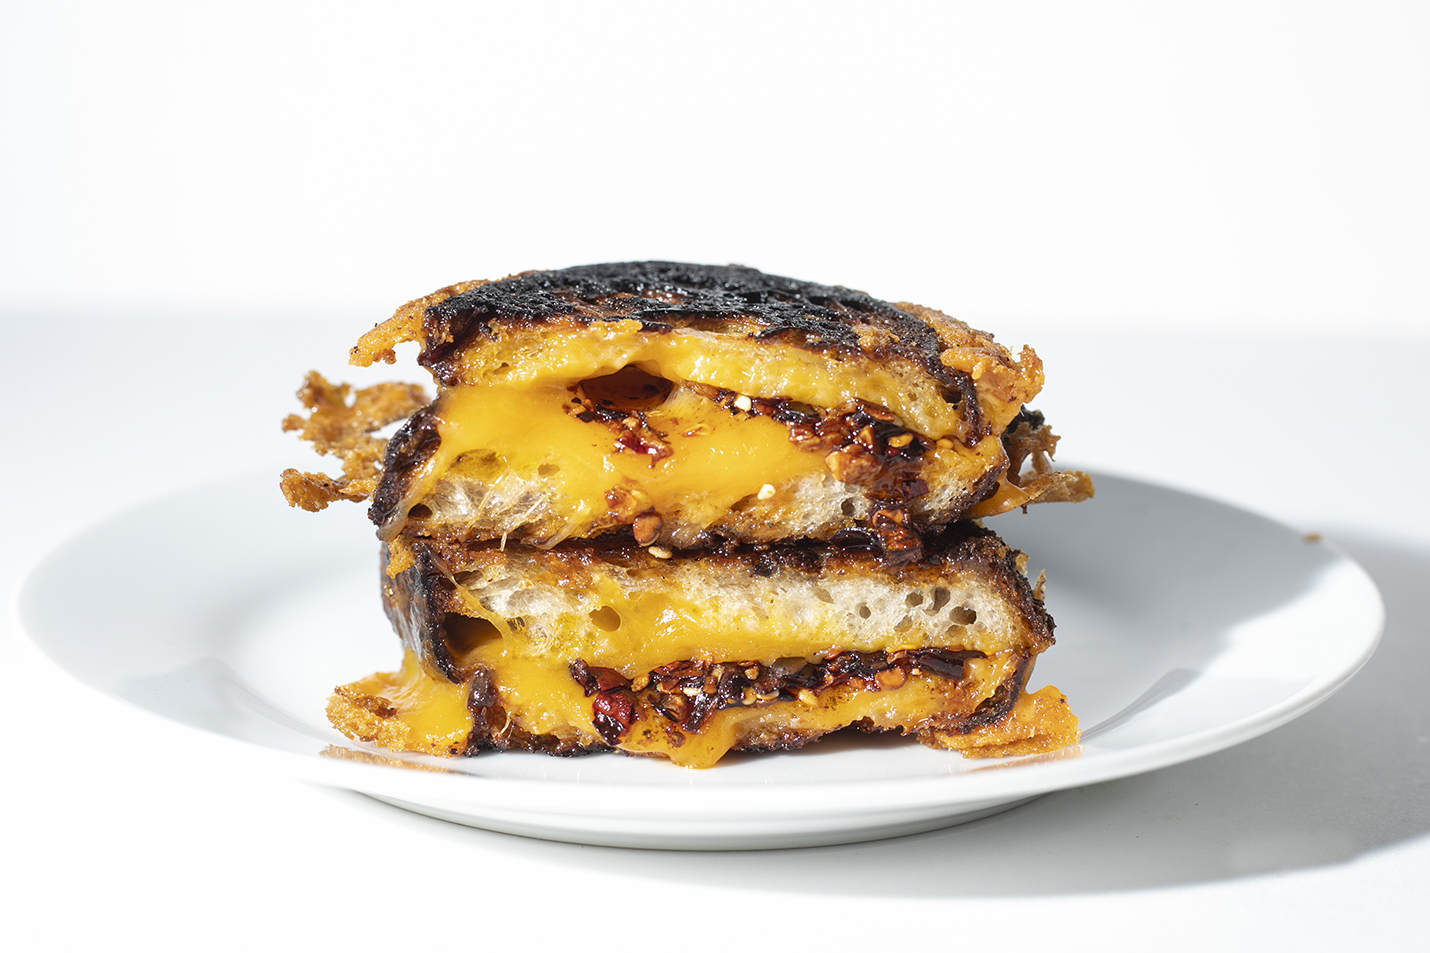 Paul Carmichael’s Grilled Cheese with Chili Crunch